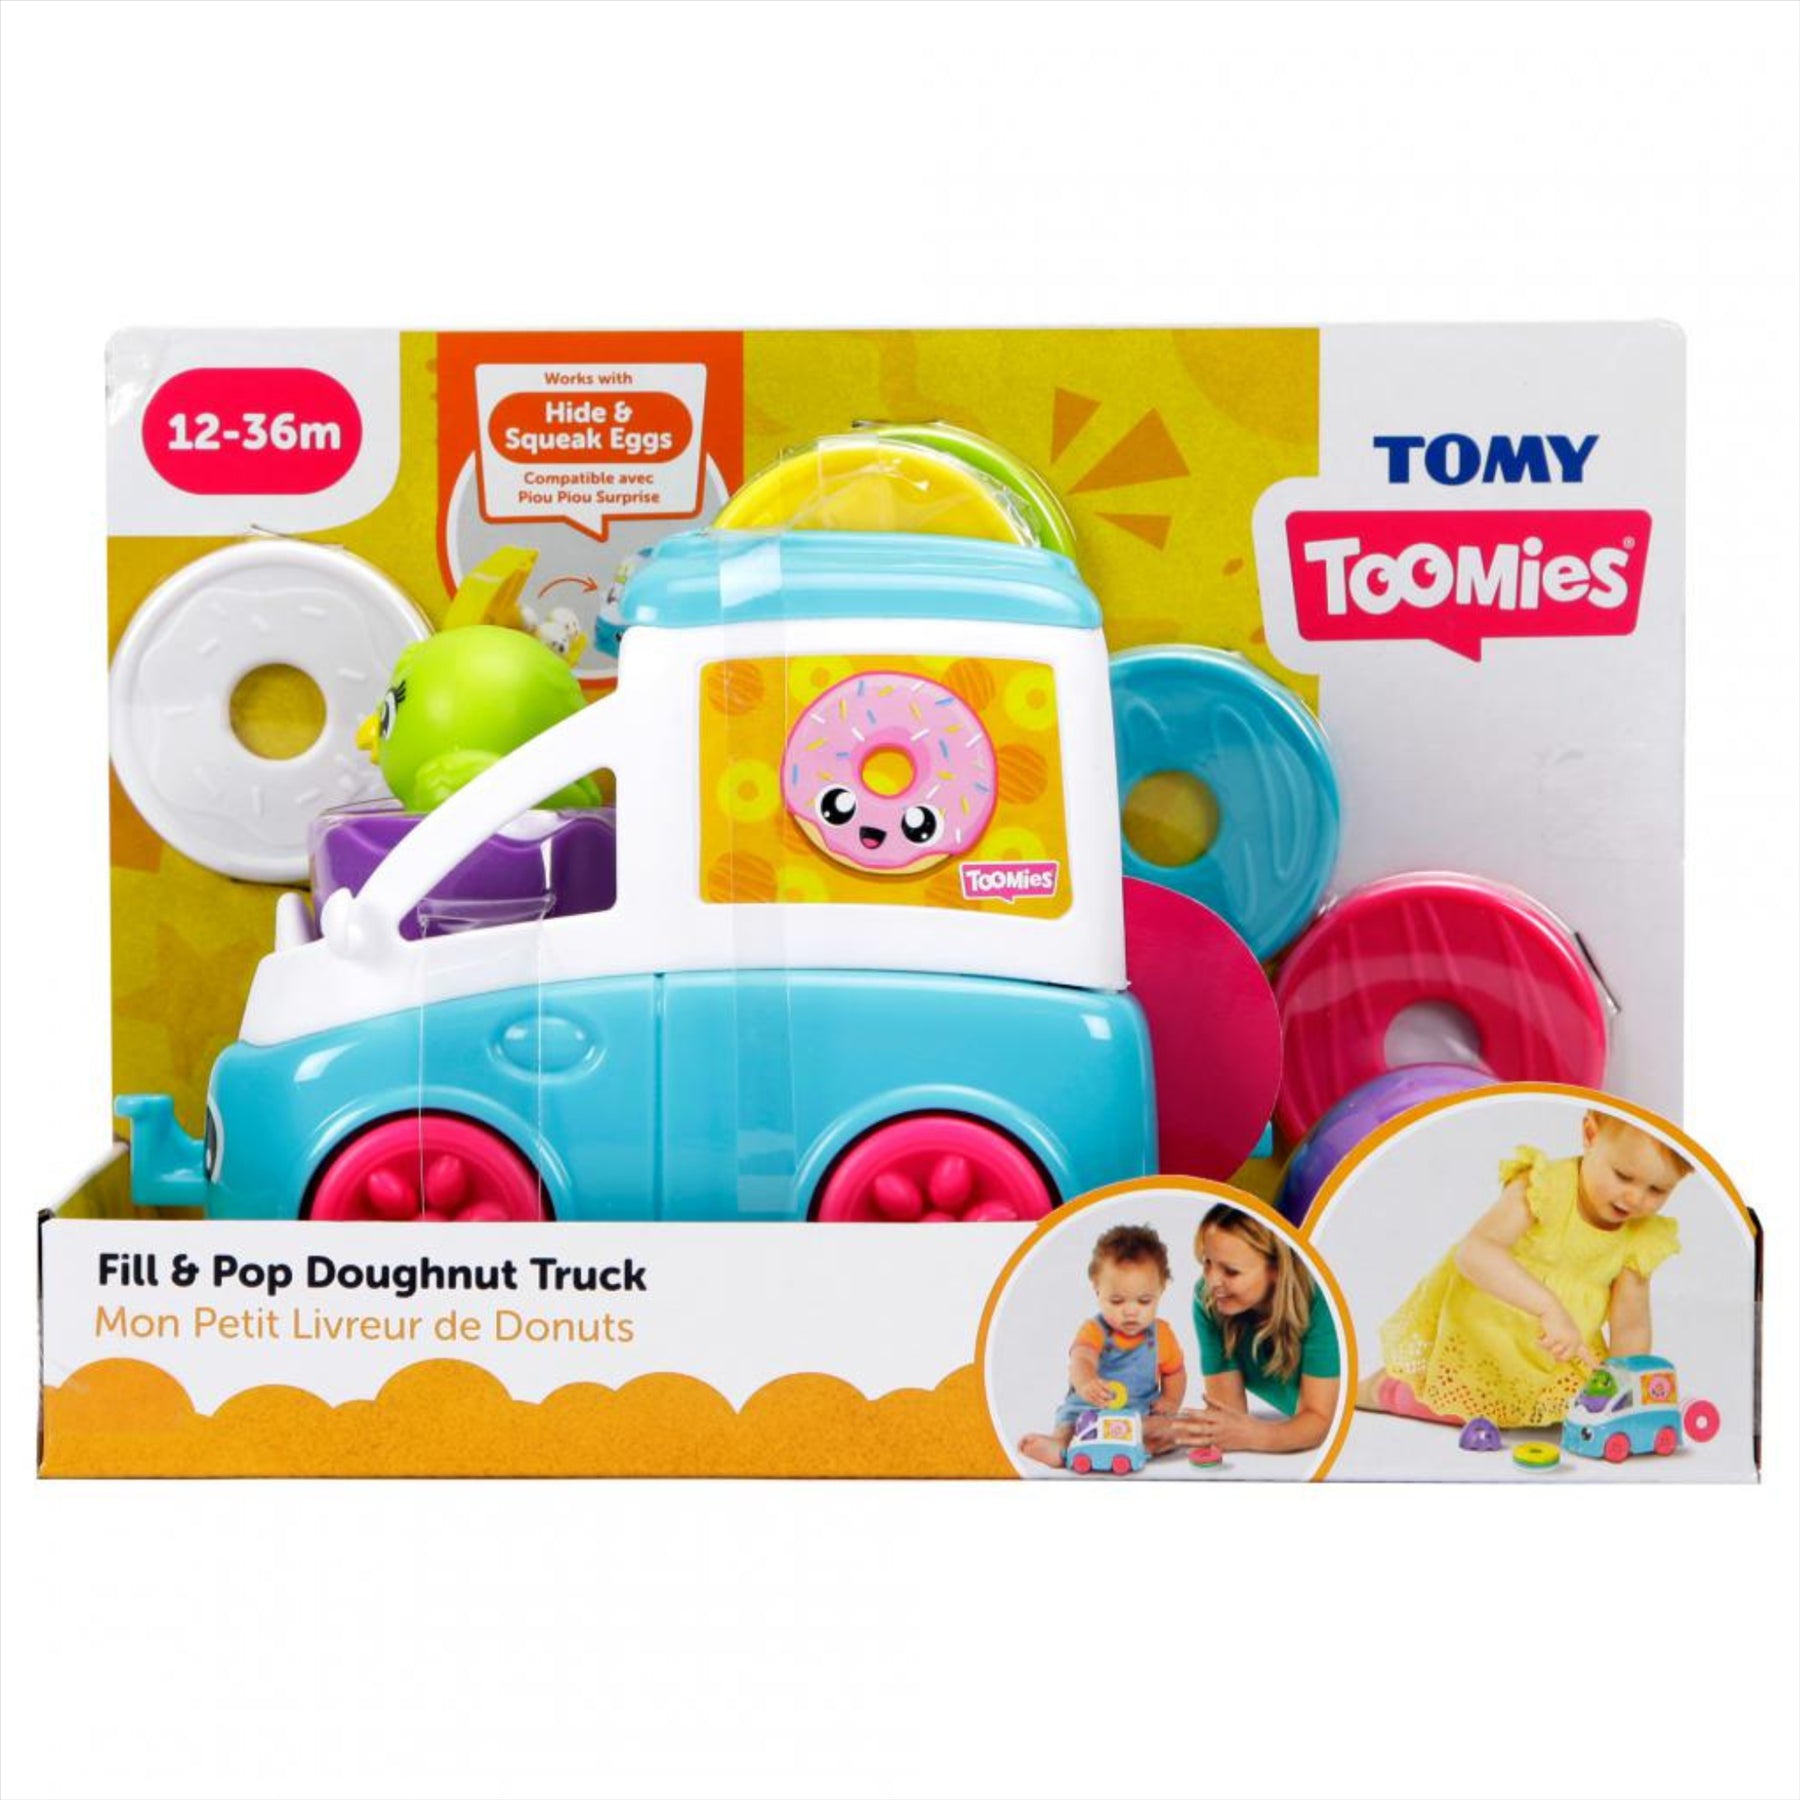 Tomy: Toomies - Fill and Pop Doughnut Truck with Hide and Squeak Egg - Educational Push-Along Play Toy for Toddlers - Toptoys2u